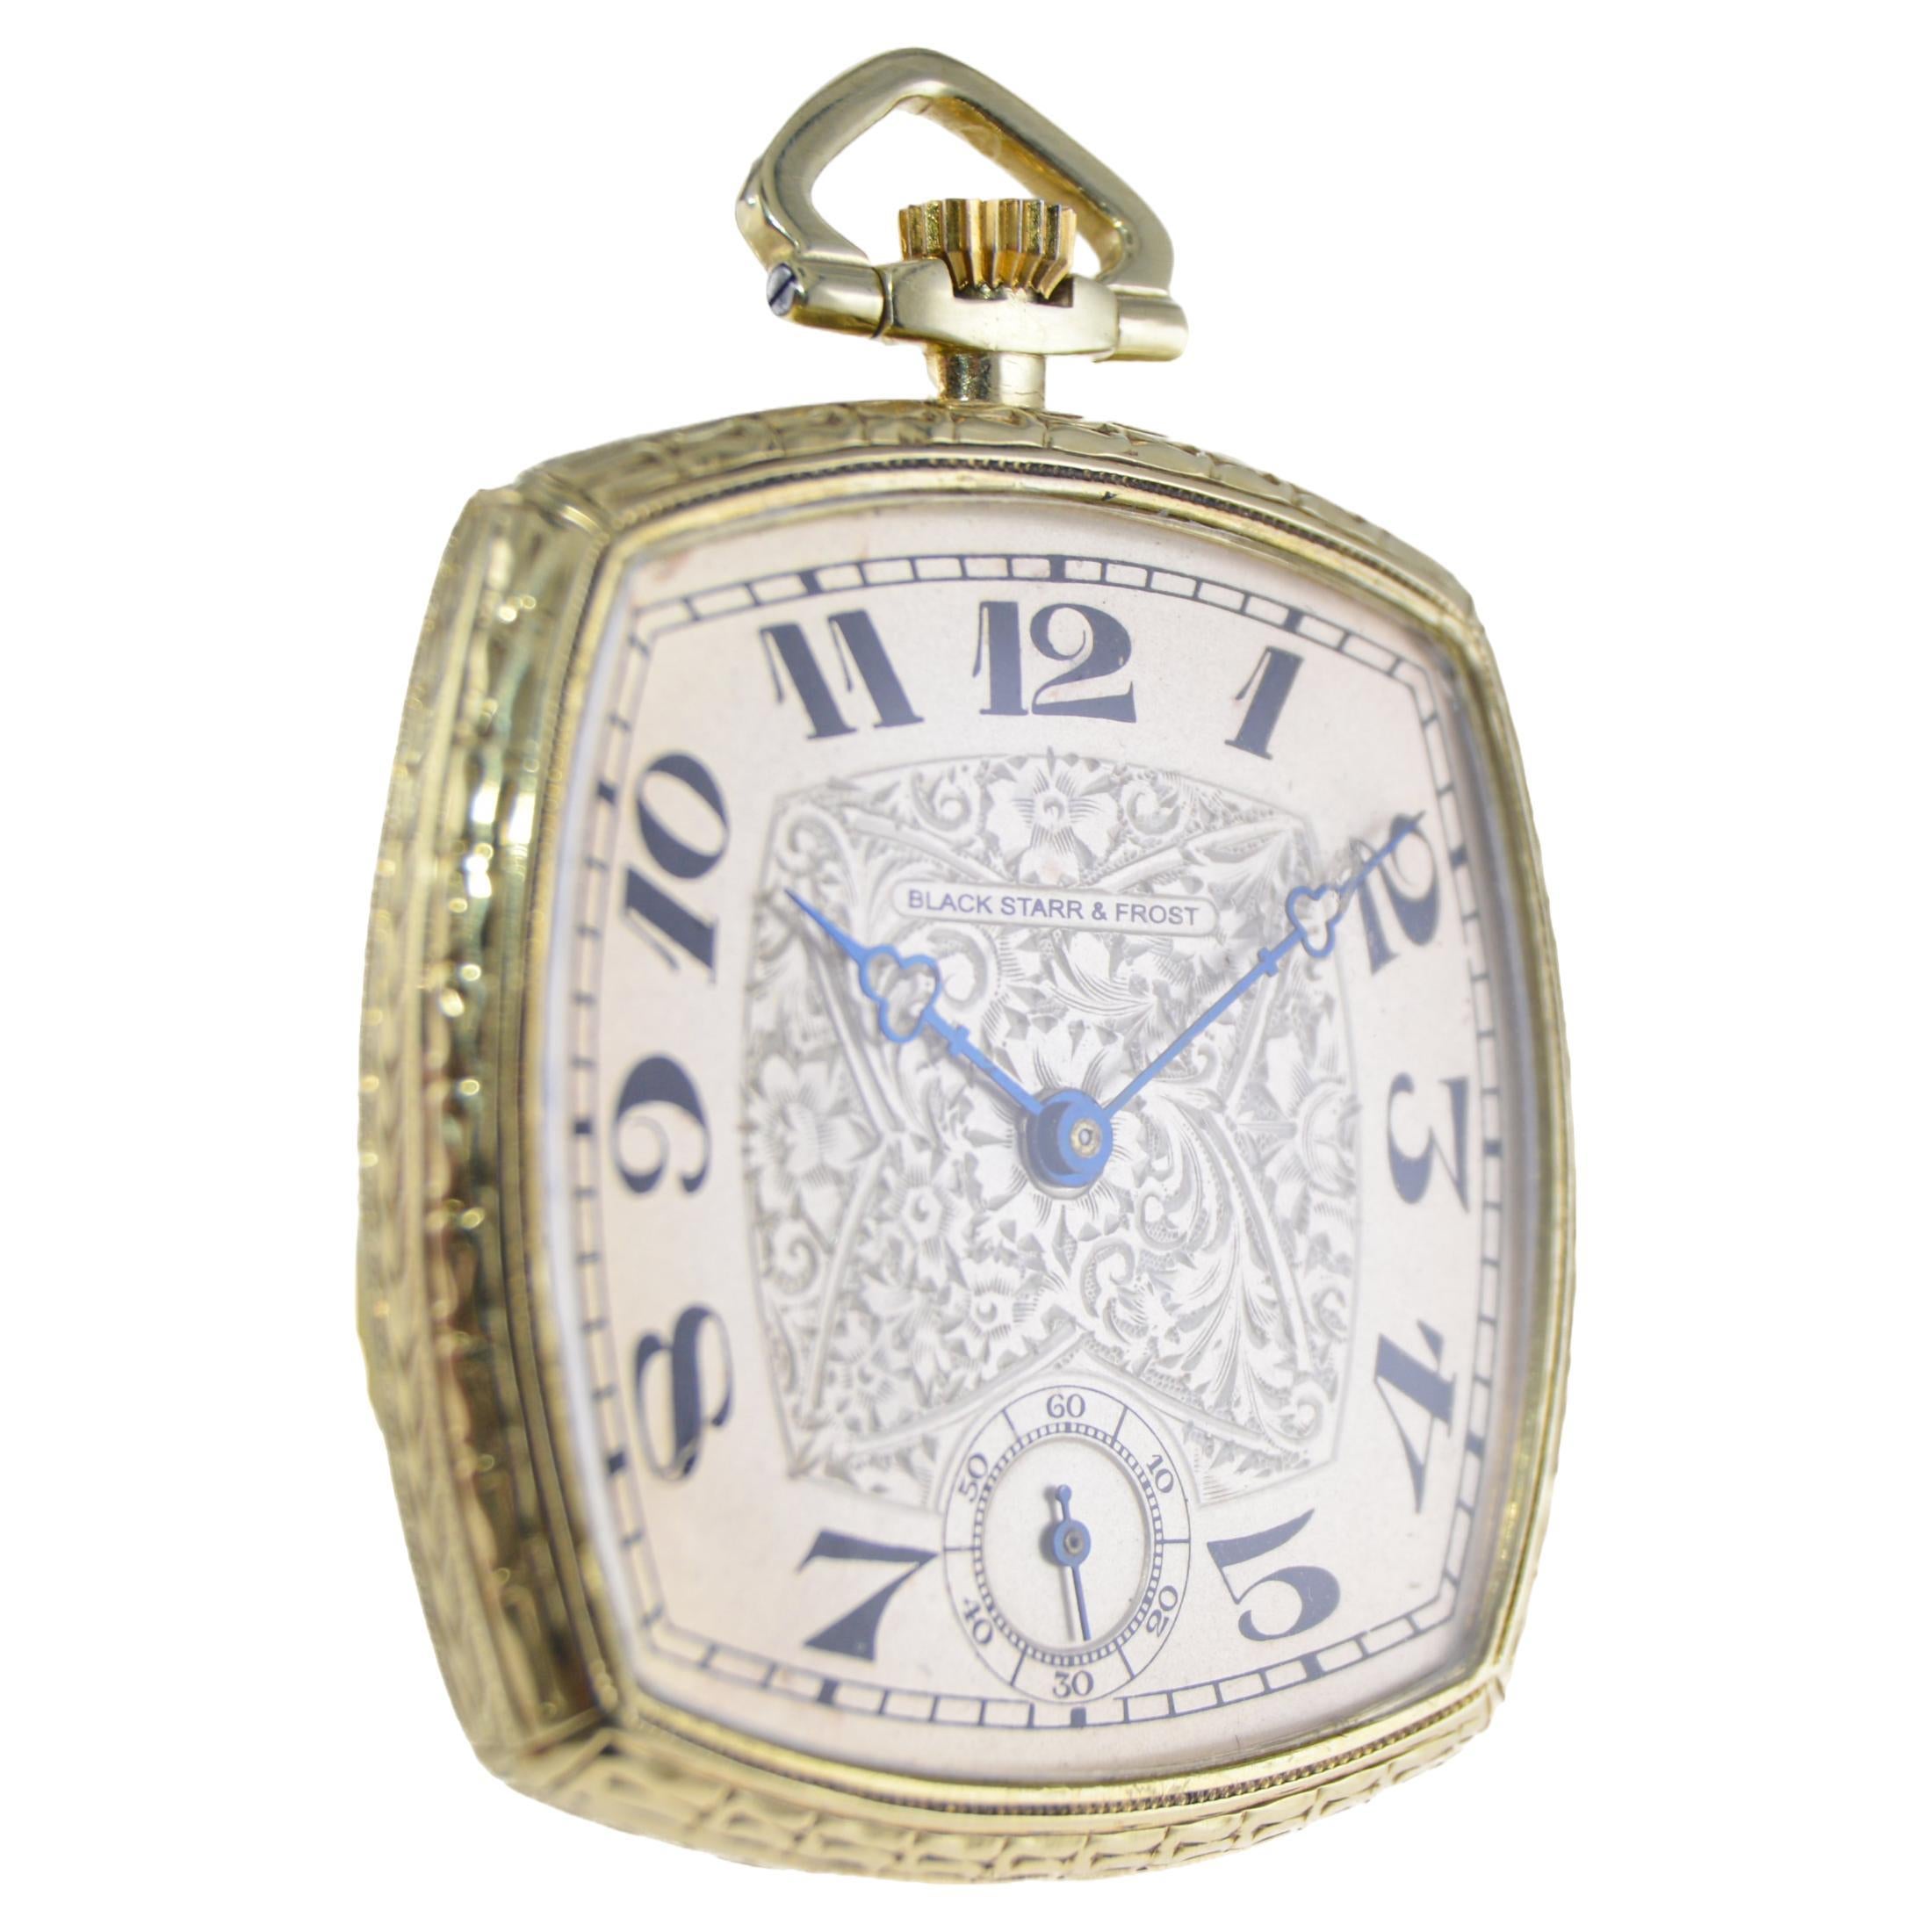 Black Starr & Frost 14 Karat Gold Art Deco Pocket Watch with Engraved Dial  For Sale 1